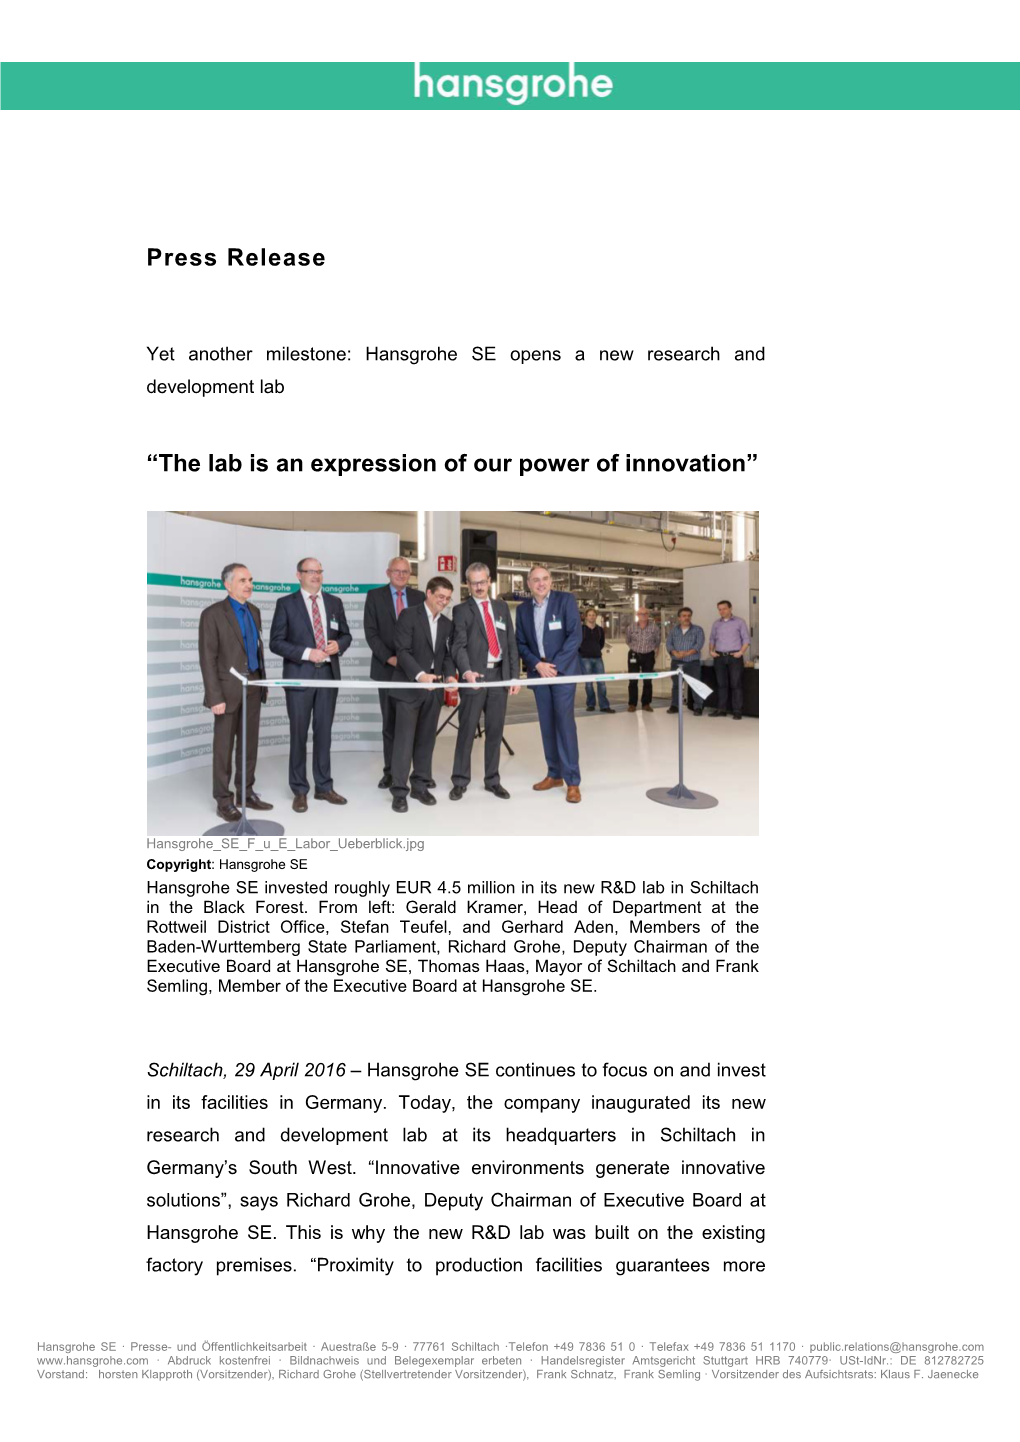 Press Release “The Lab Is an Expression of Our Power Of